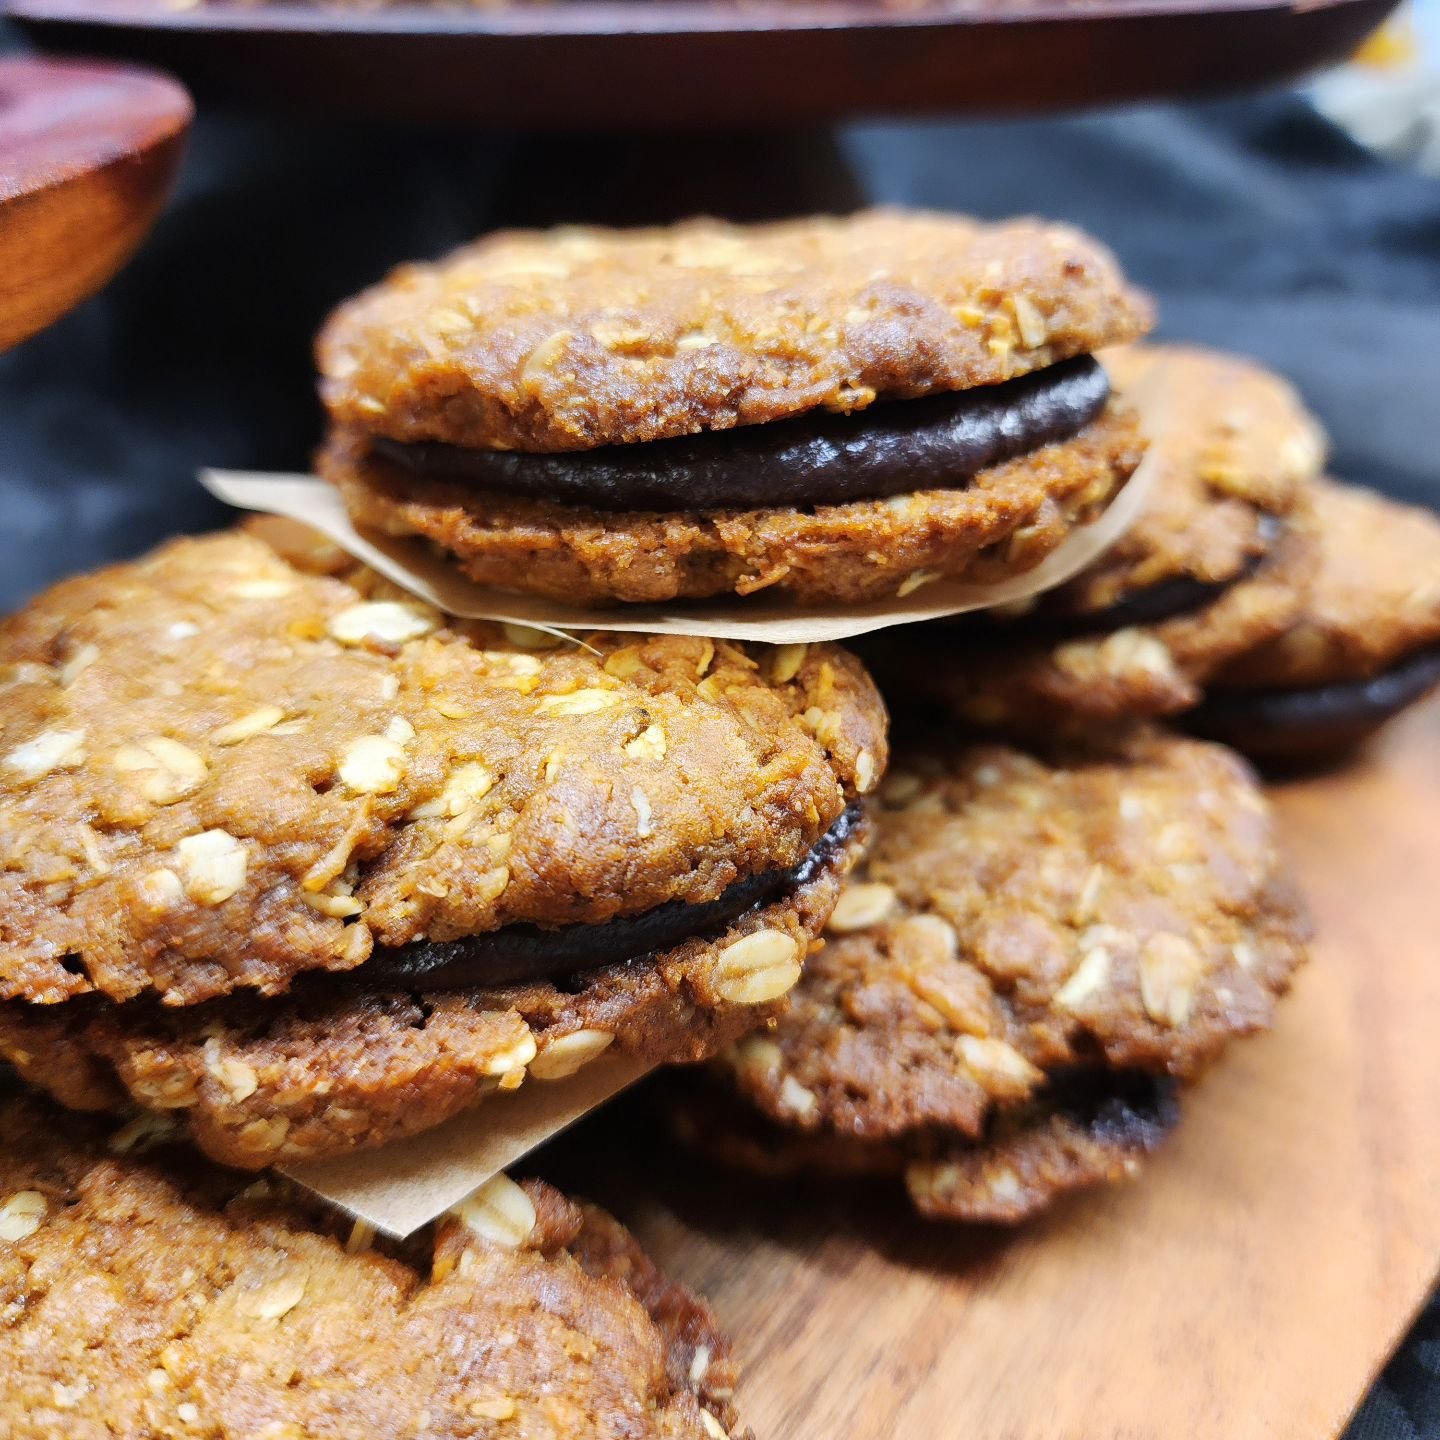 The chocolate Anzac cookie.